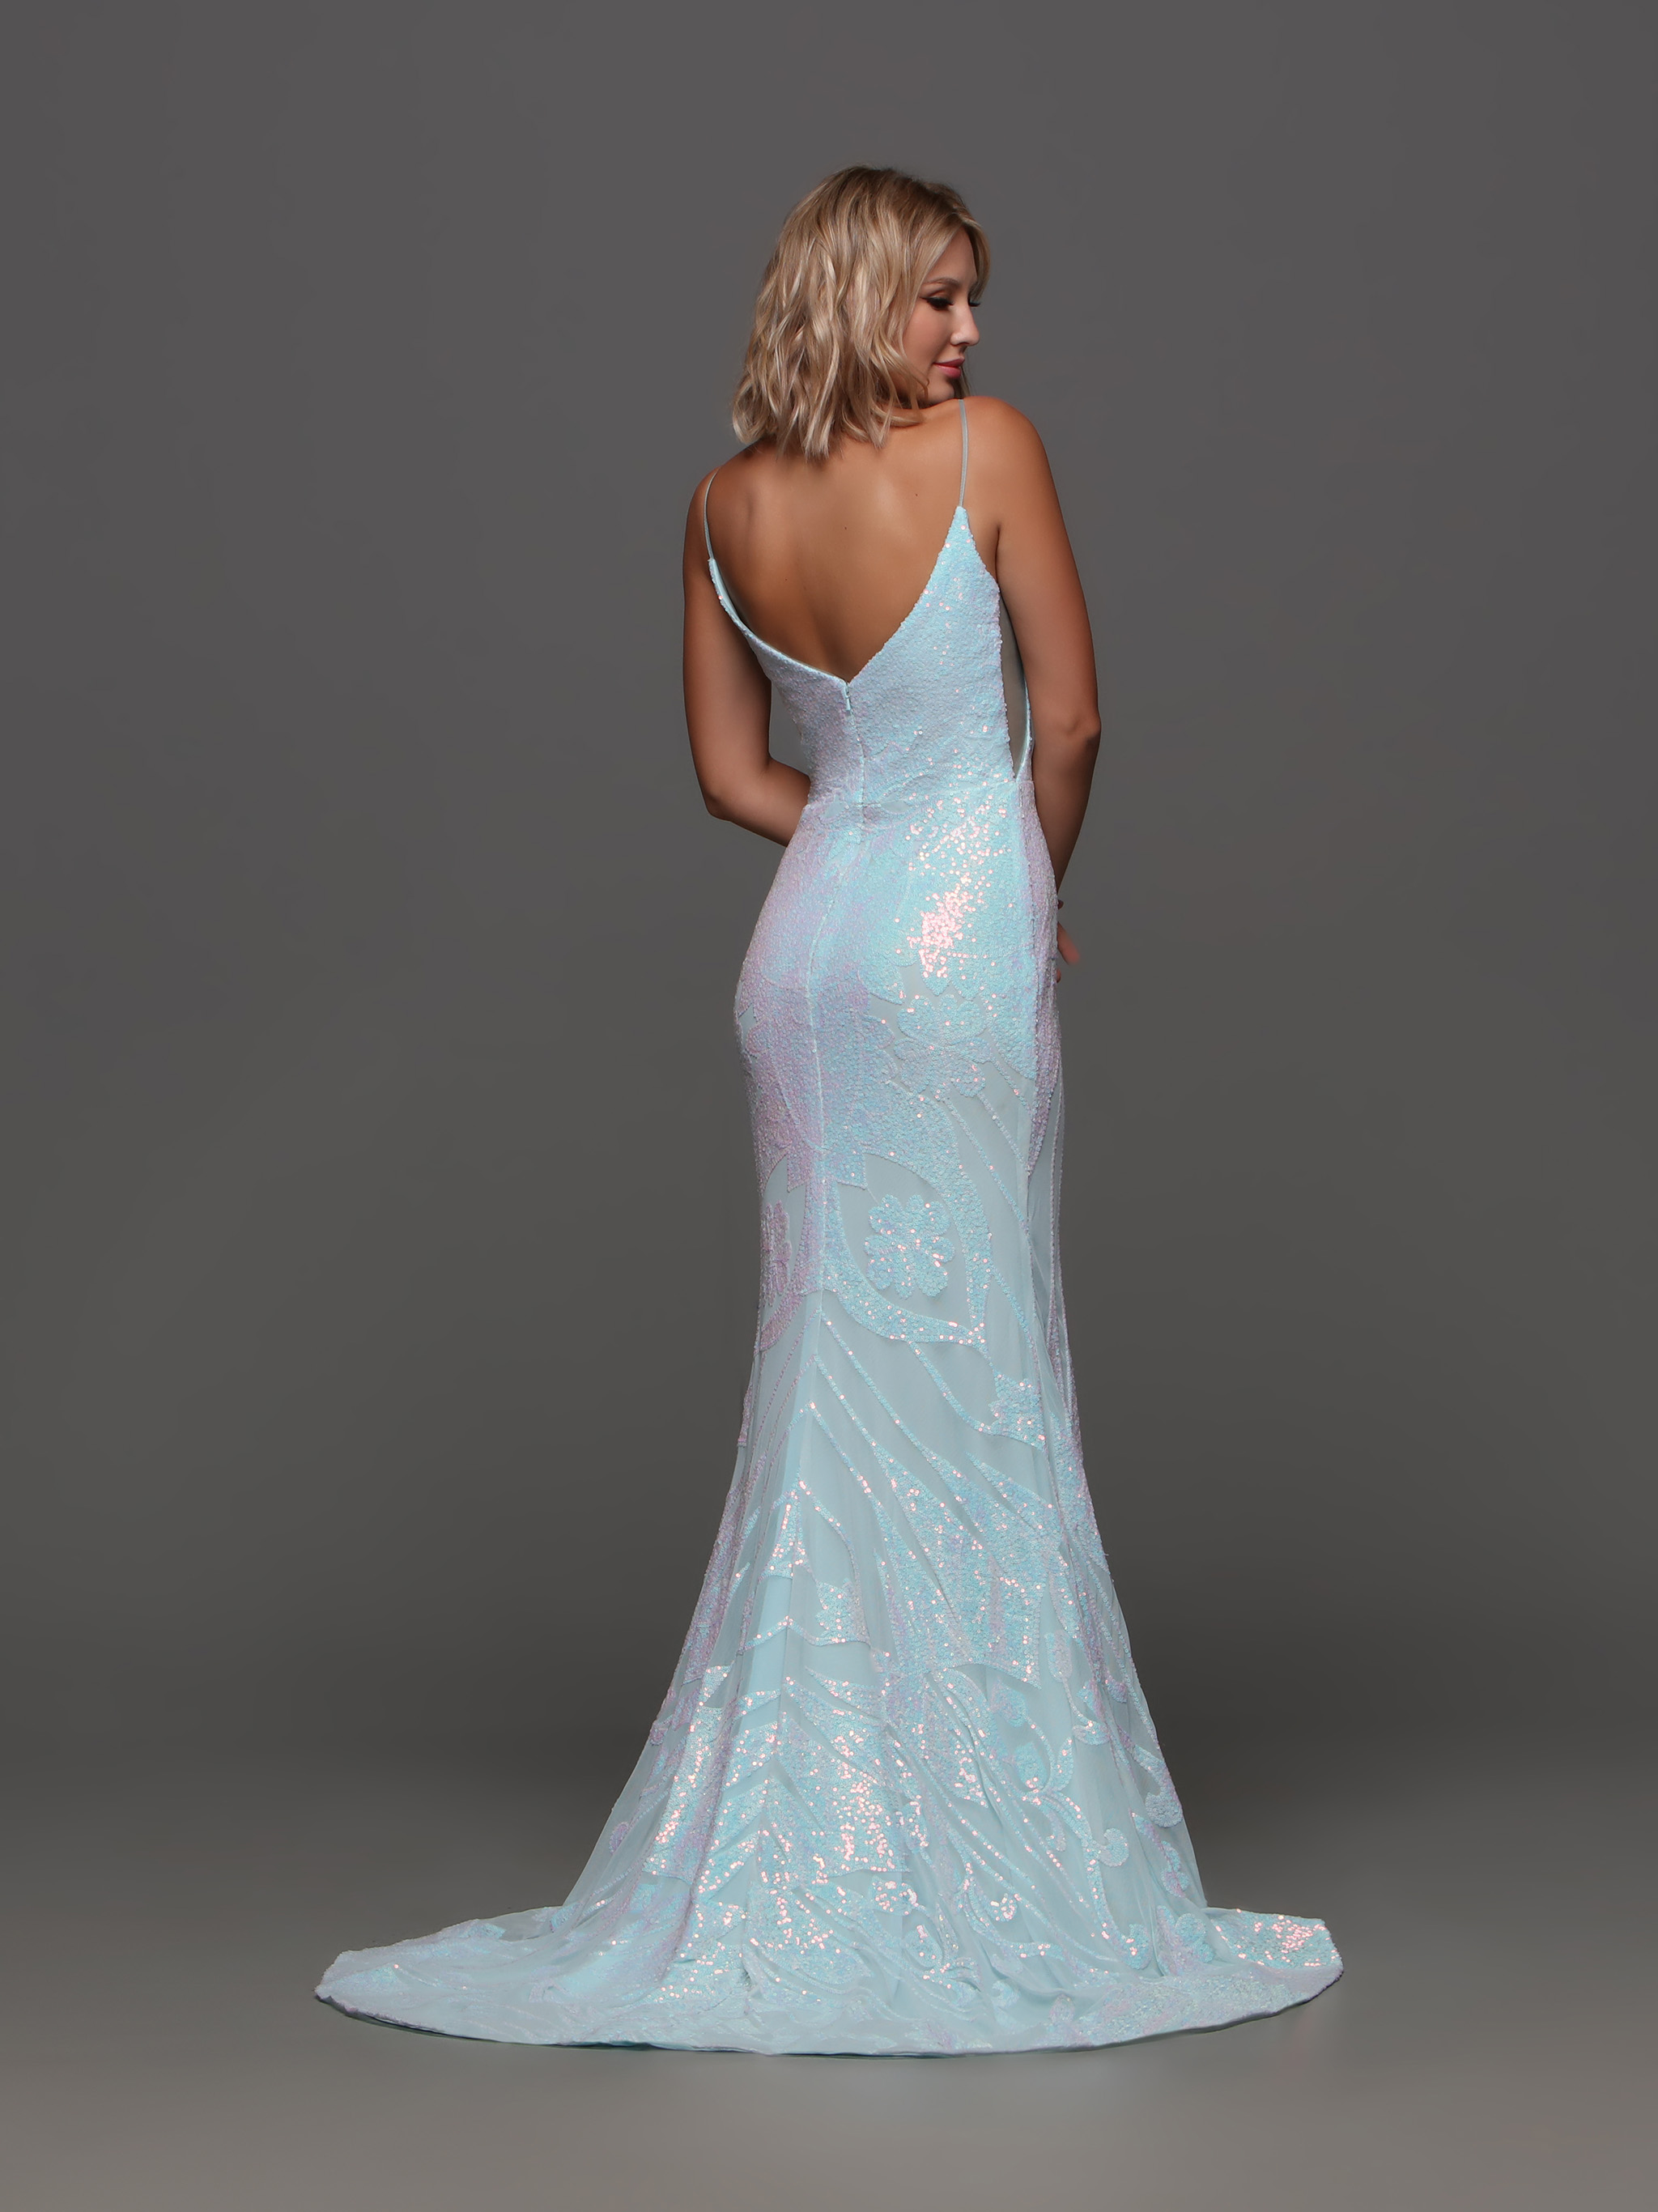 Image showing back view of style #72310